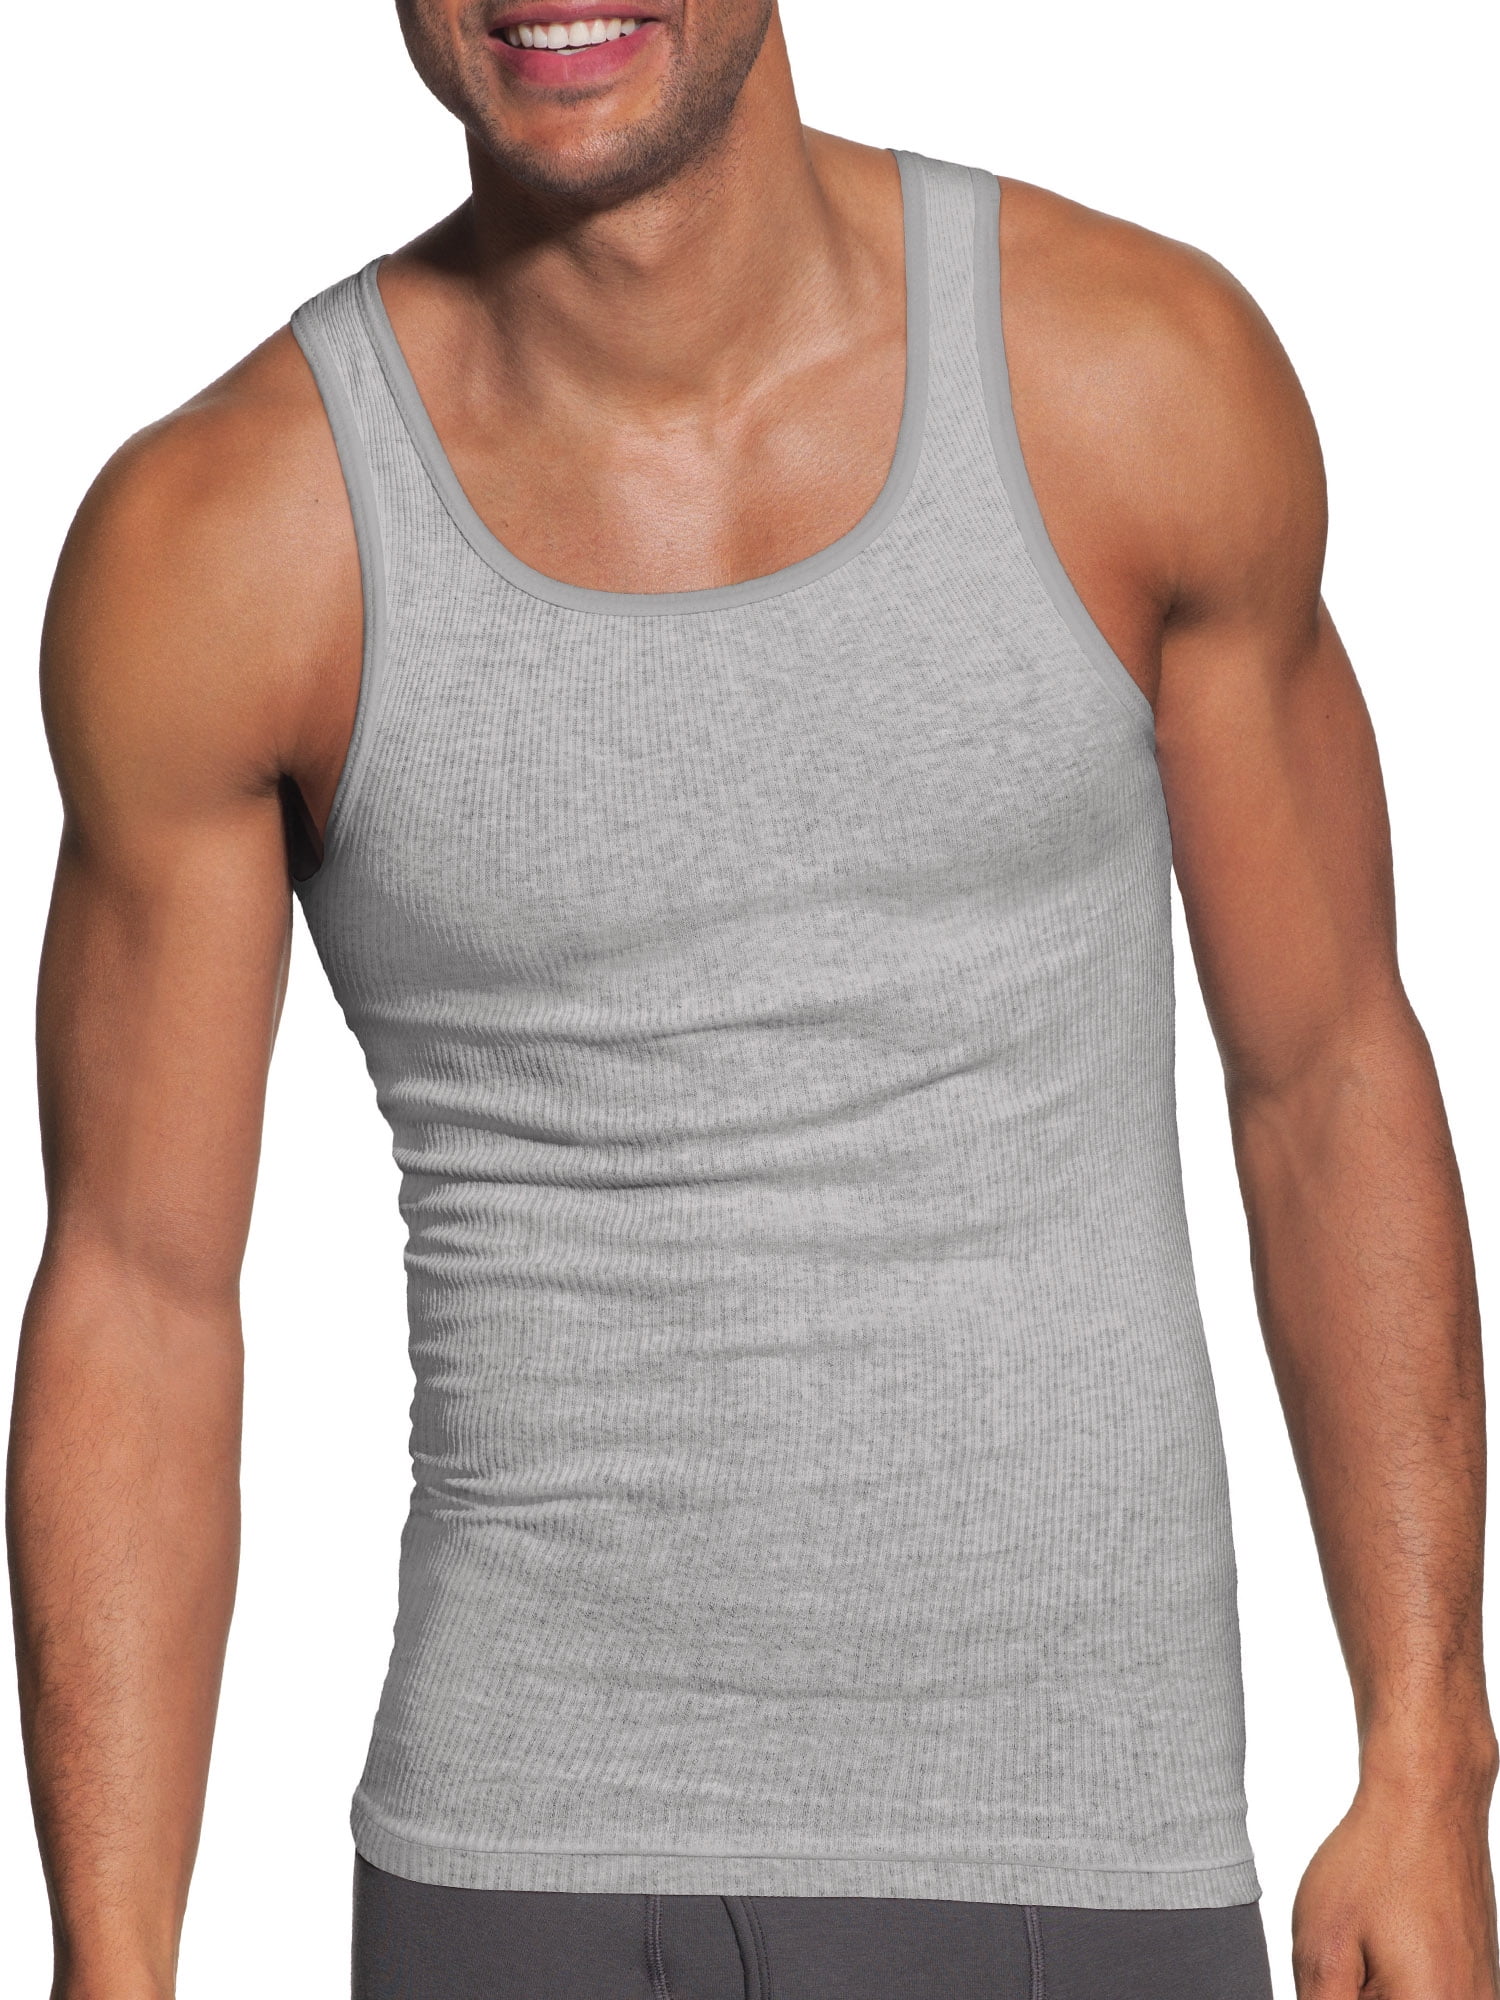 7-Pack Hanes Men's TAGLESS ComfortSoft A-Shirt White Wife Beater Size S-XL 